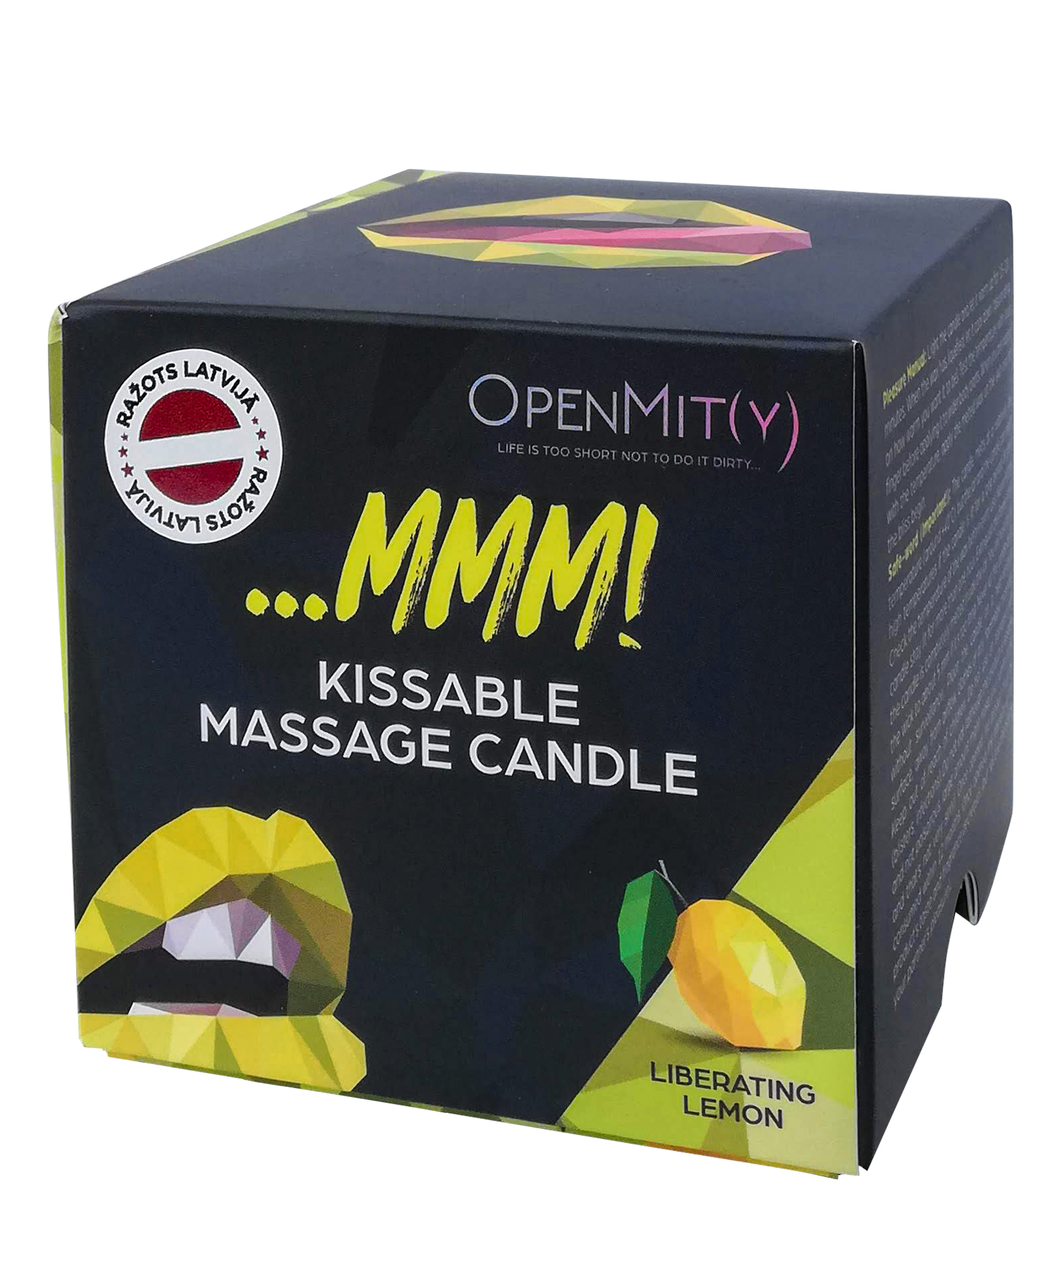 OpenMity scented kissable massage candle (125 ml)